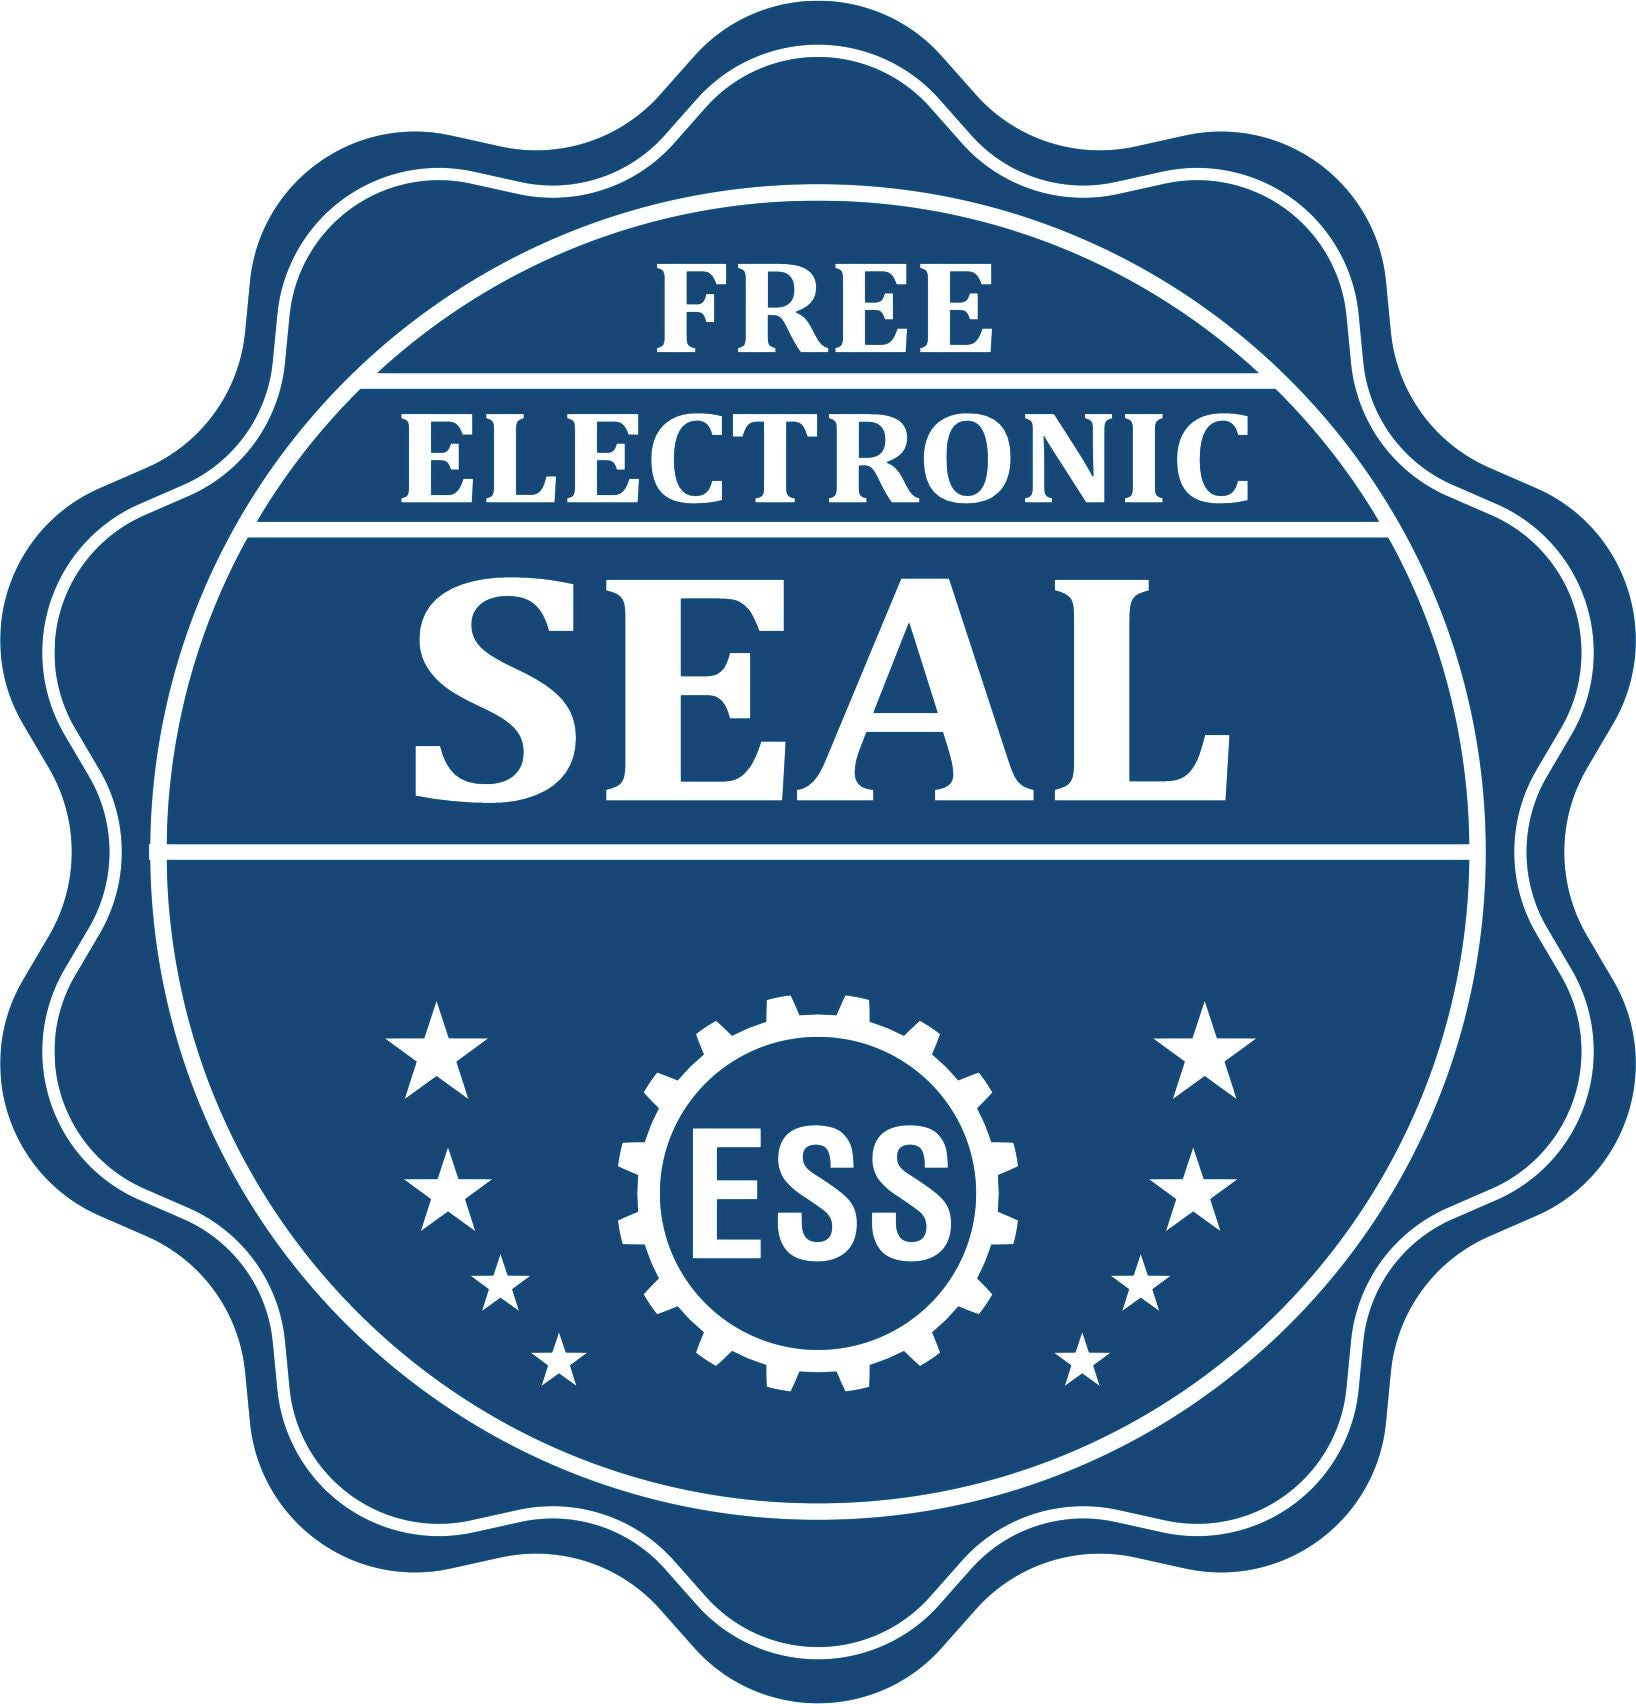 A badge showing a free electronic seal for the Long Reach Colorado PE Seal with stars and the ESS gear on the emblem.